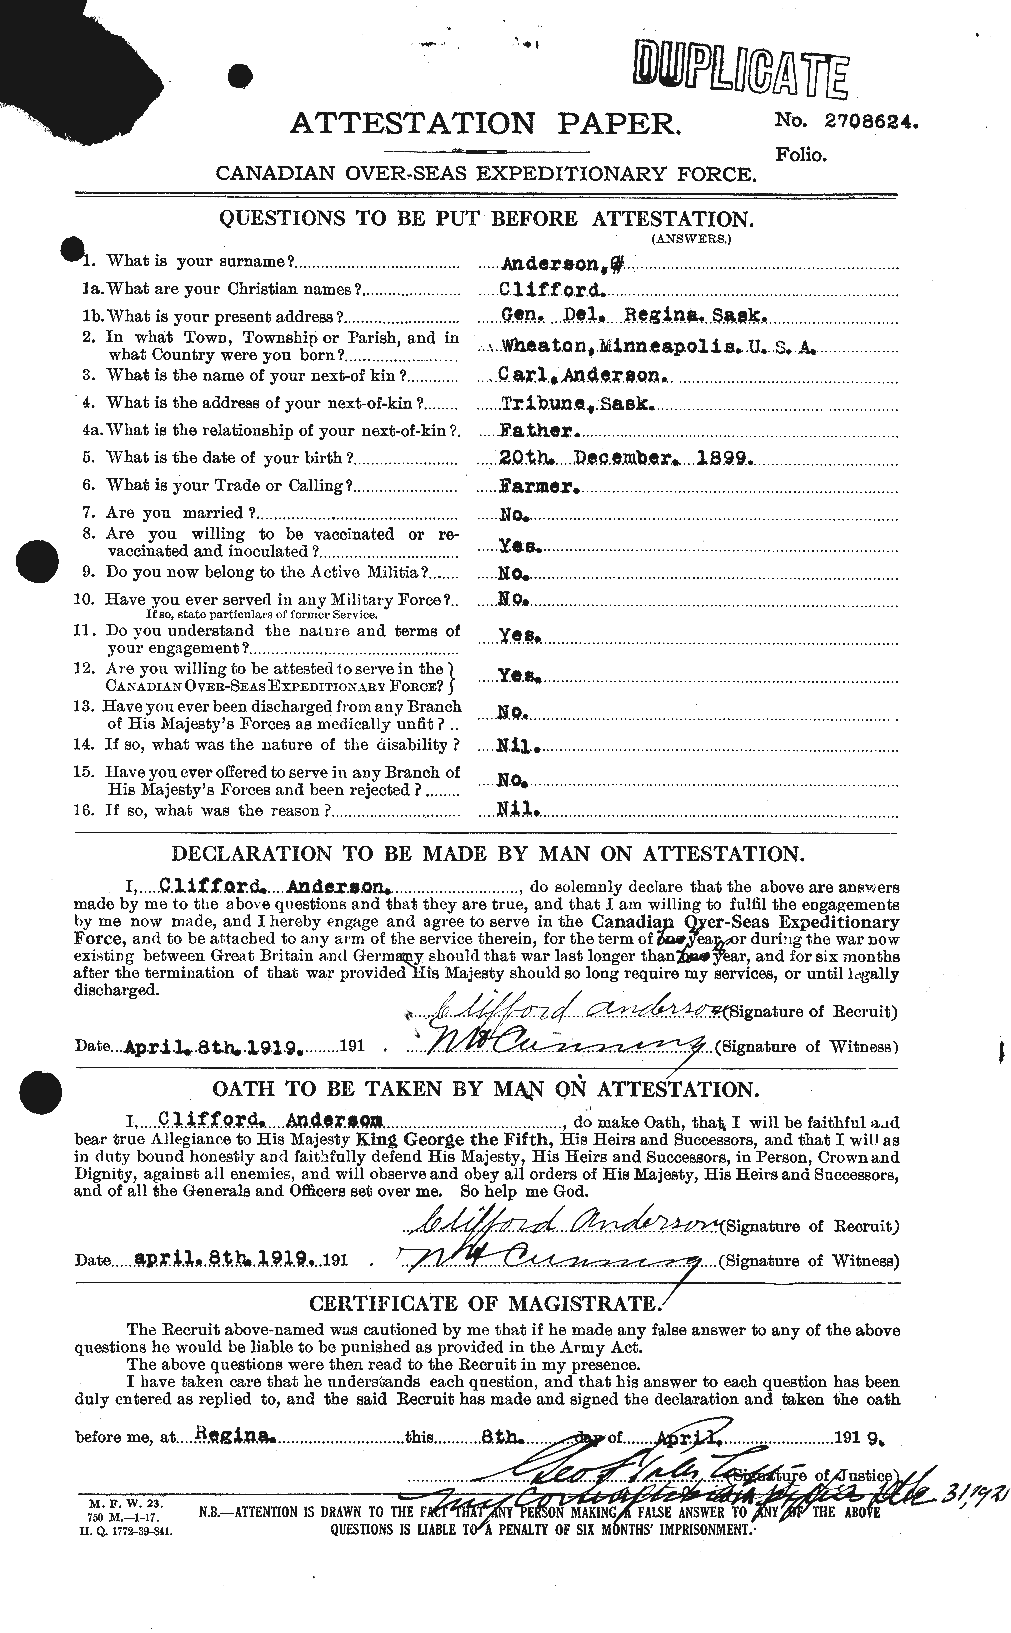 Personnel Records of the First World War - CEF 210063a